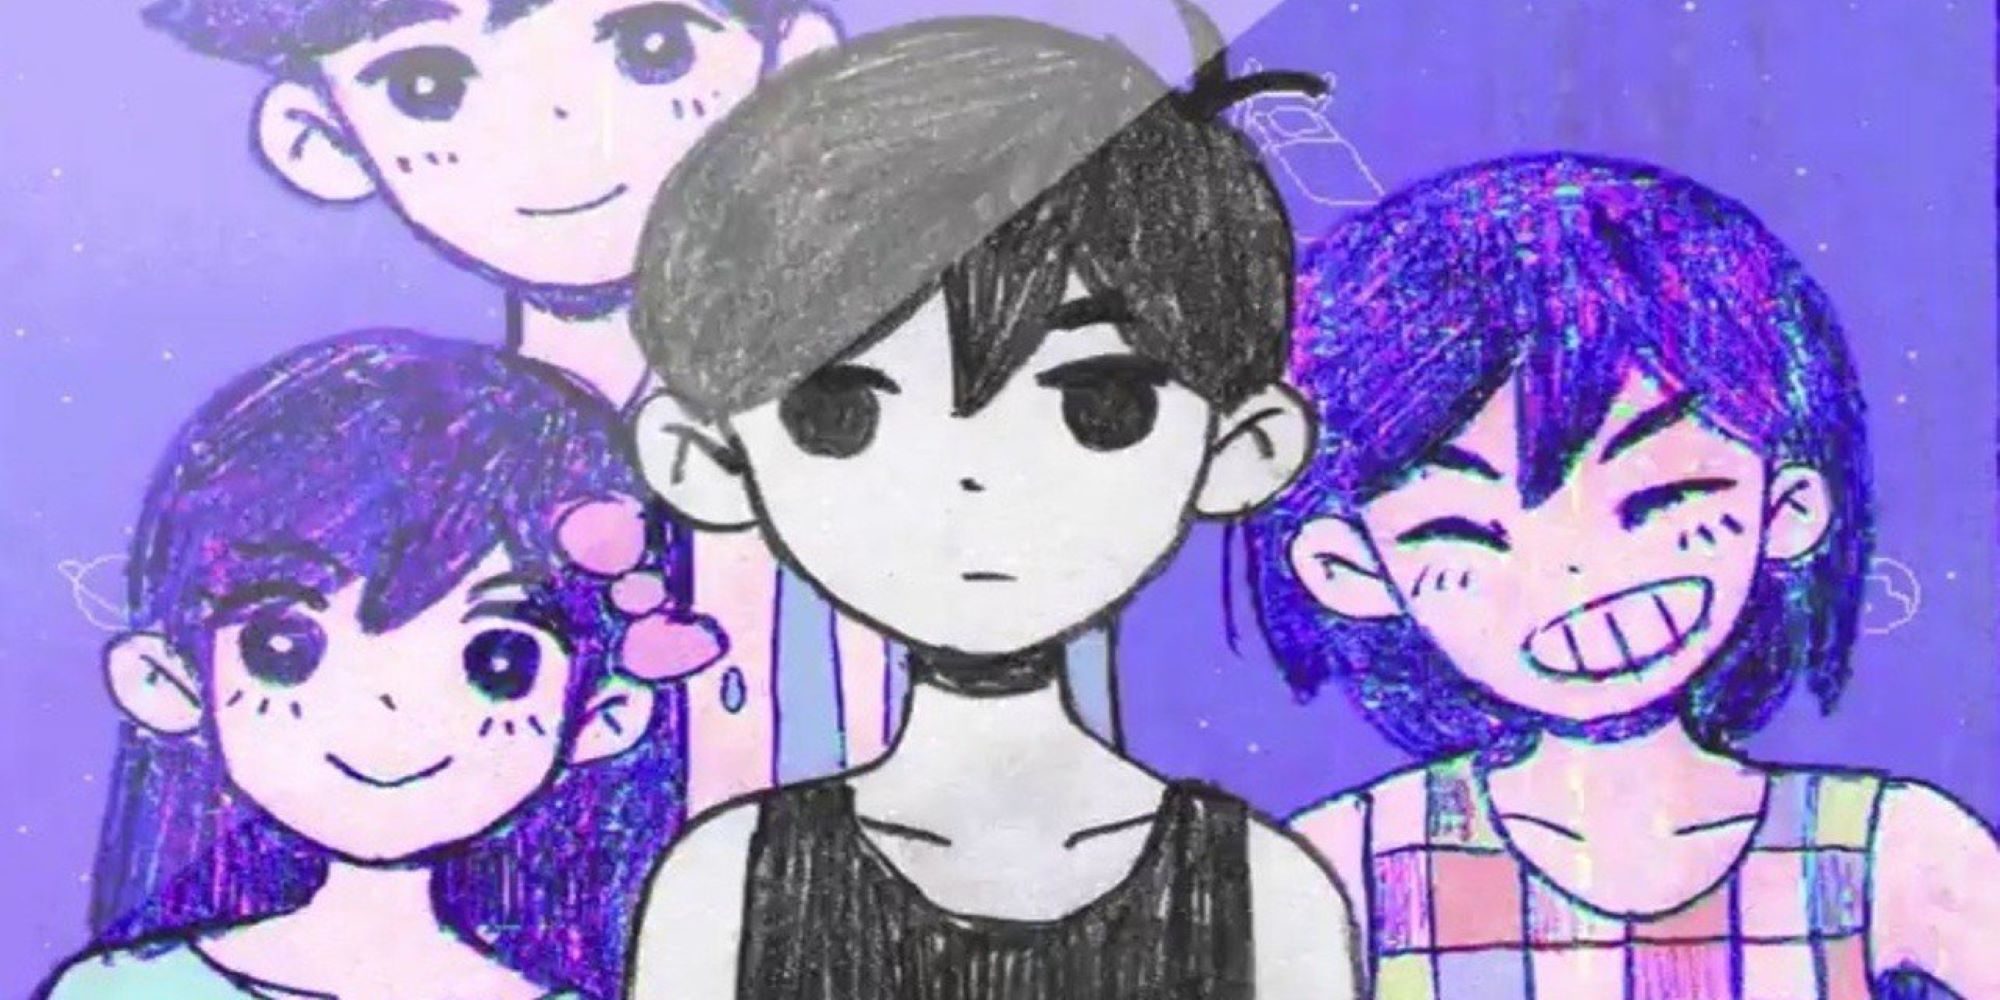 A selfie-like close-up of Omori and the group of friends in the hazy imaginary purple world of the Head Space.